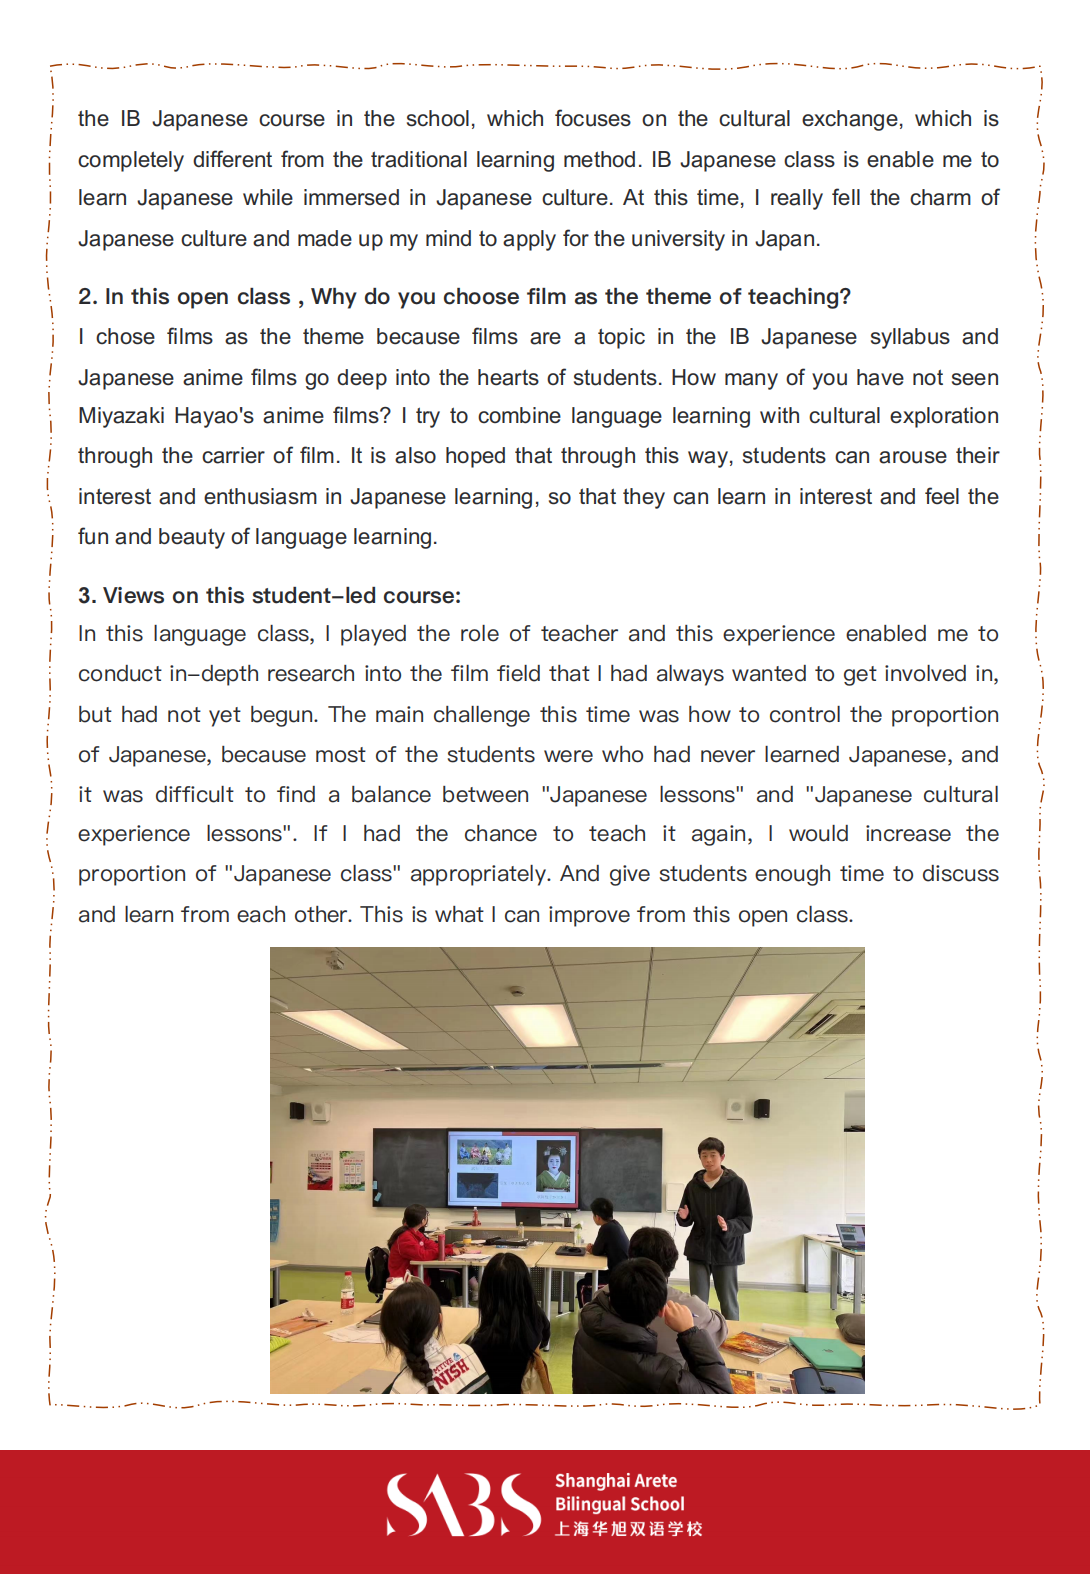 HS 4th Issue Newsletter pptx（English）_14.png